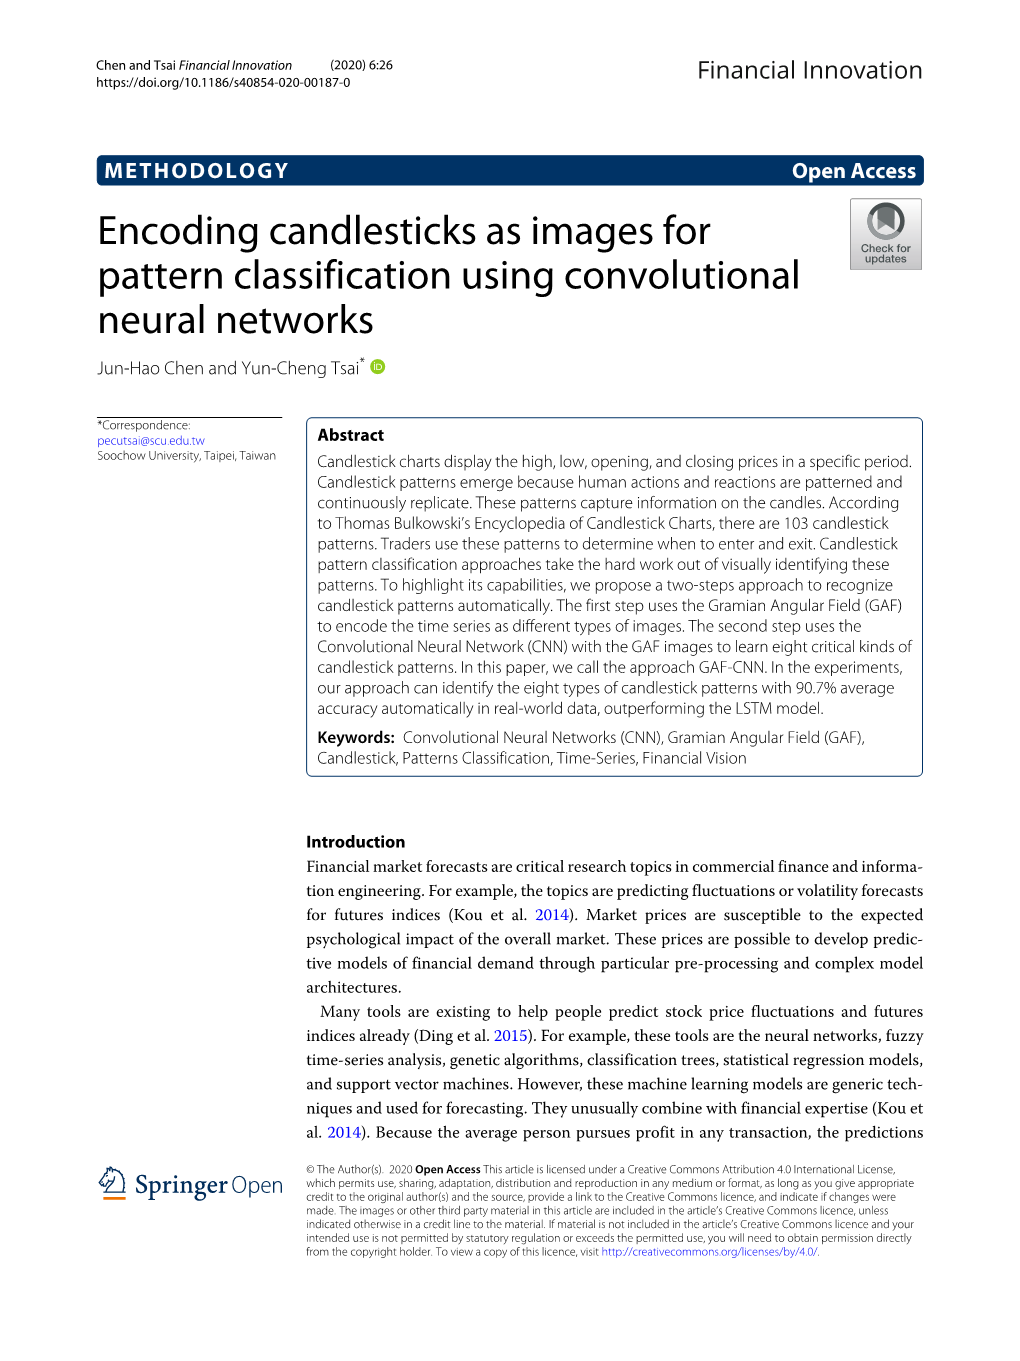 Encoding Candlesticks As Images for Pattern Classification Using Convolutional Neural Networks Jun-Hao Chen and Yun-Cheng Tsai*